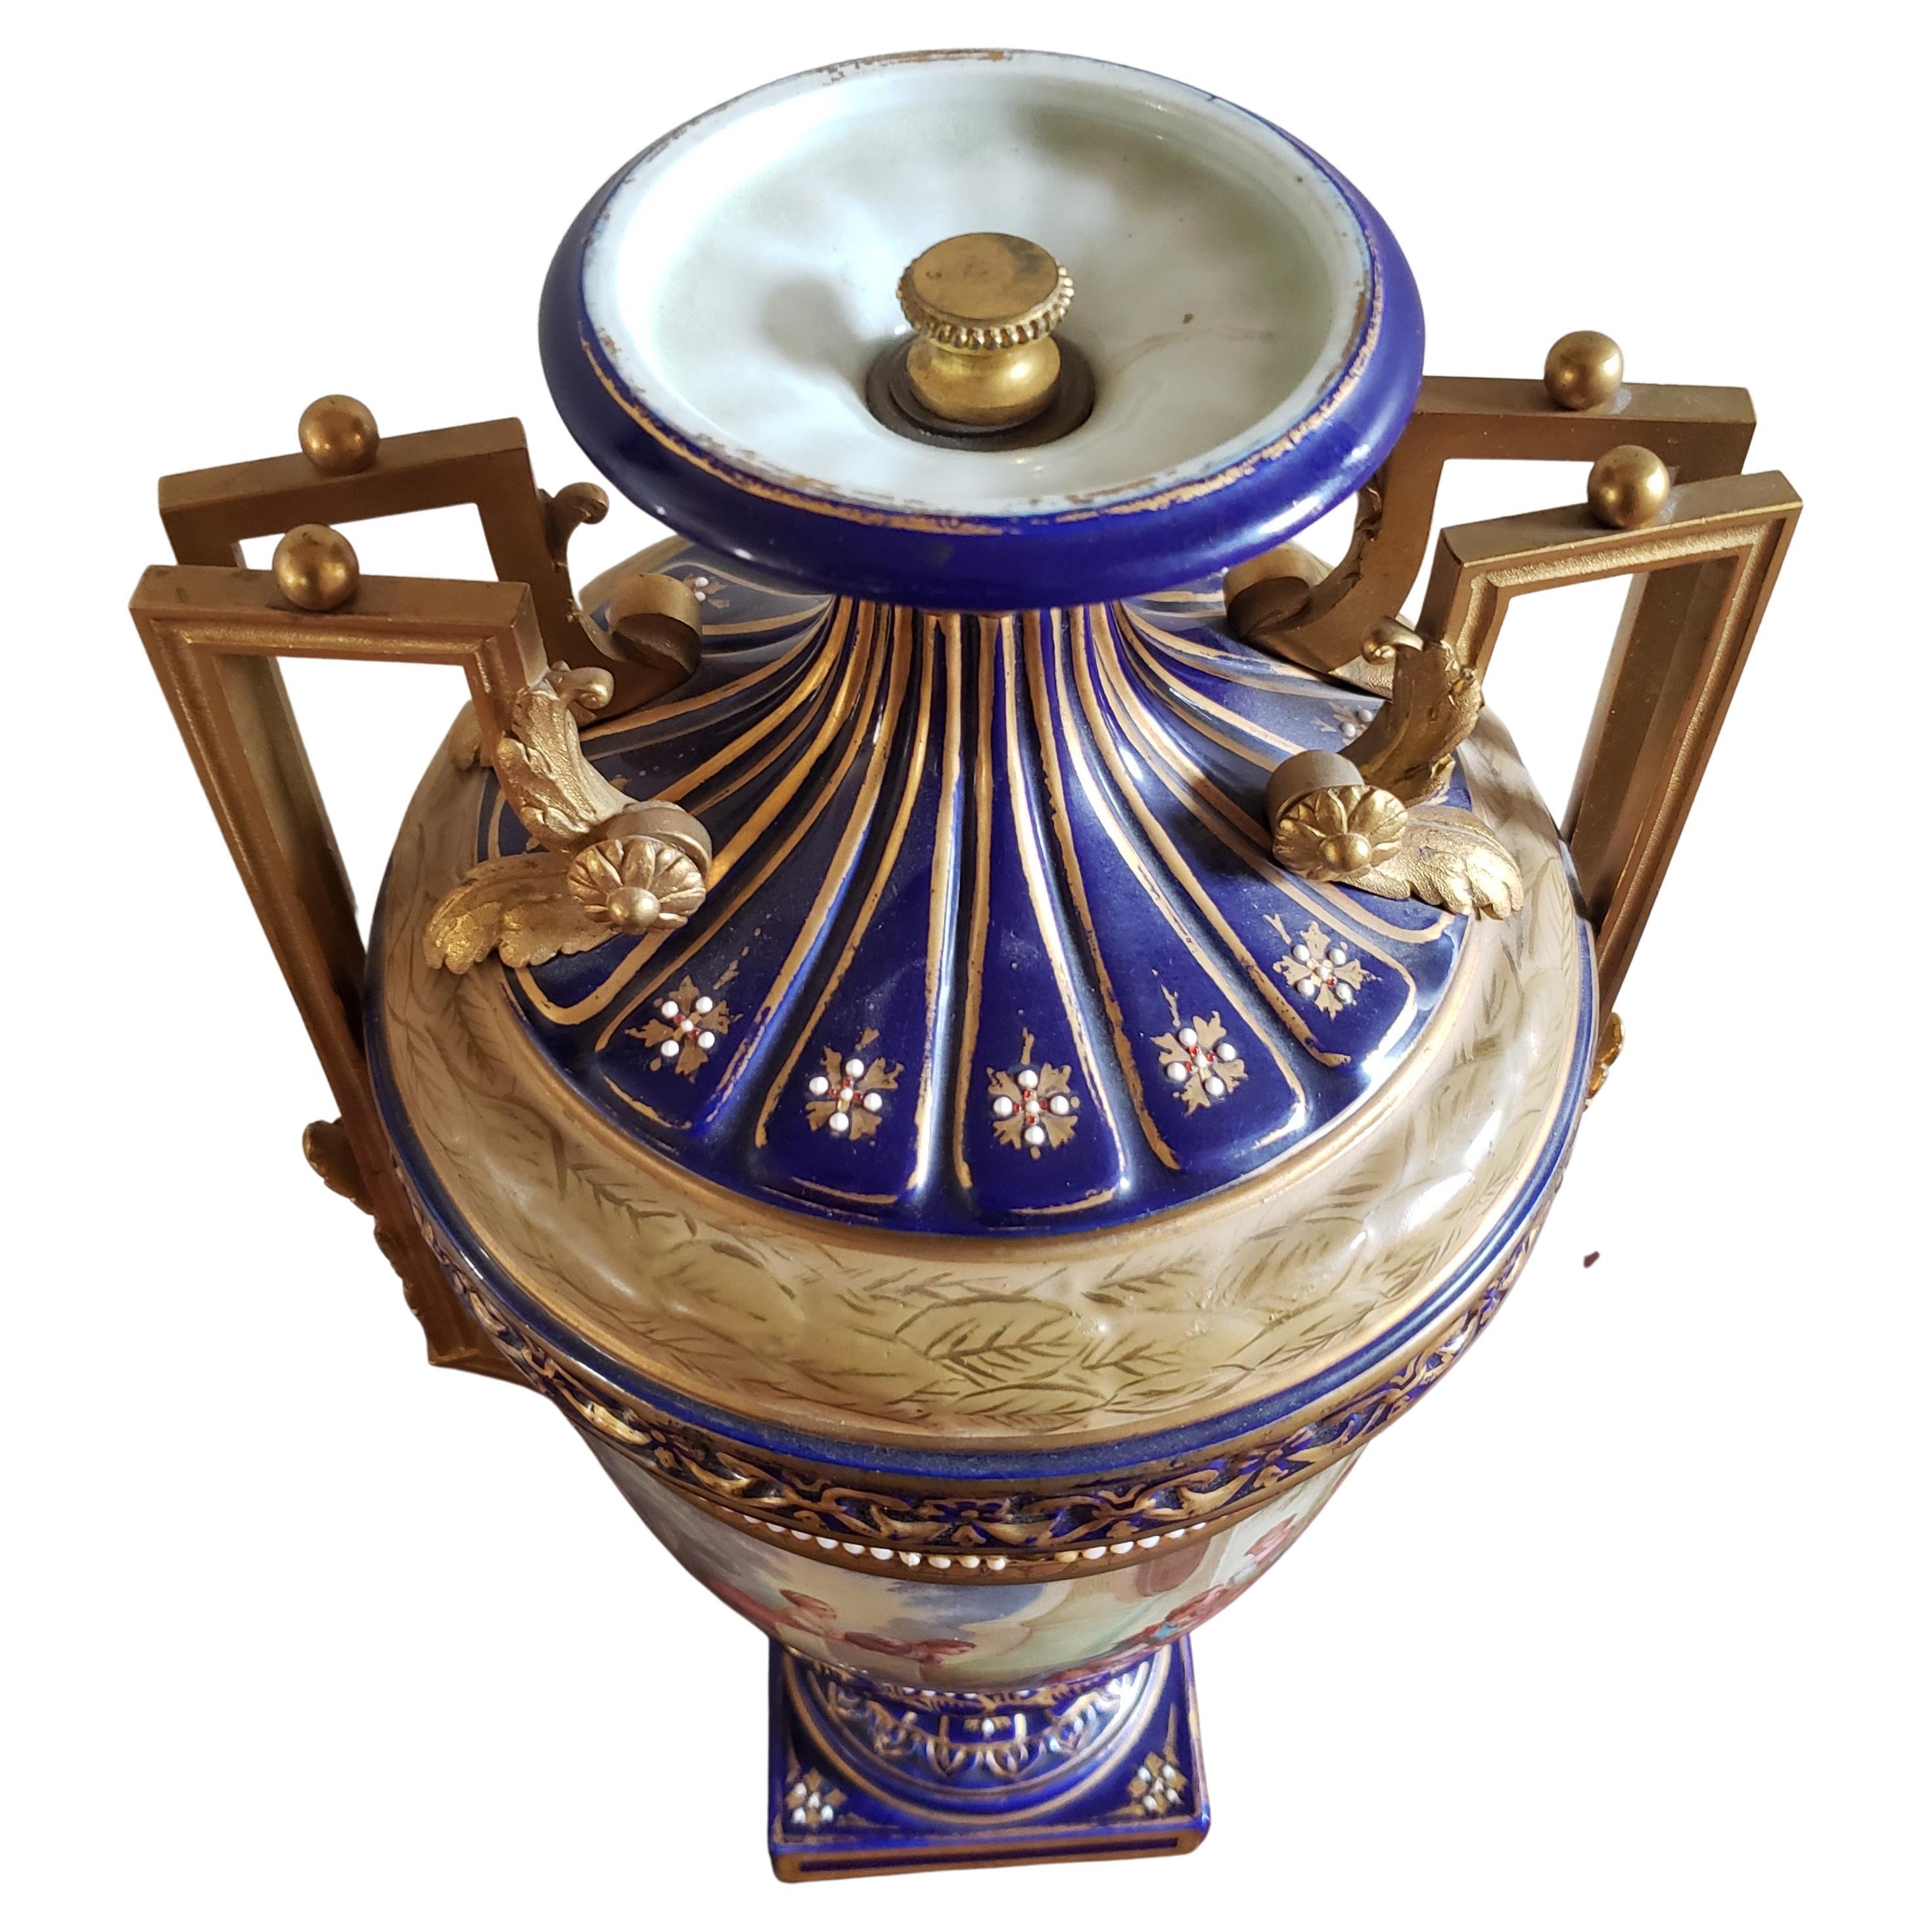 French Pair of 19th Century Sevres Porcelain Hand Painted Cobalt & Gilt Decorated Urns For Sale